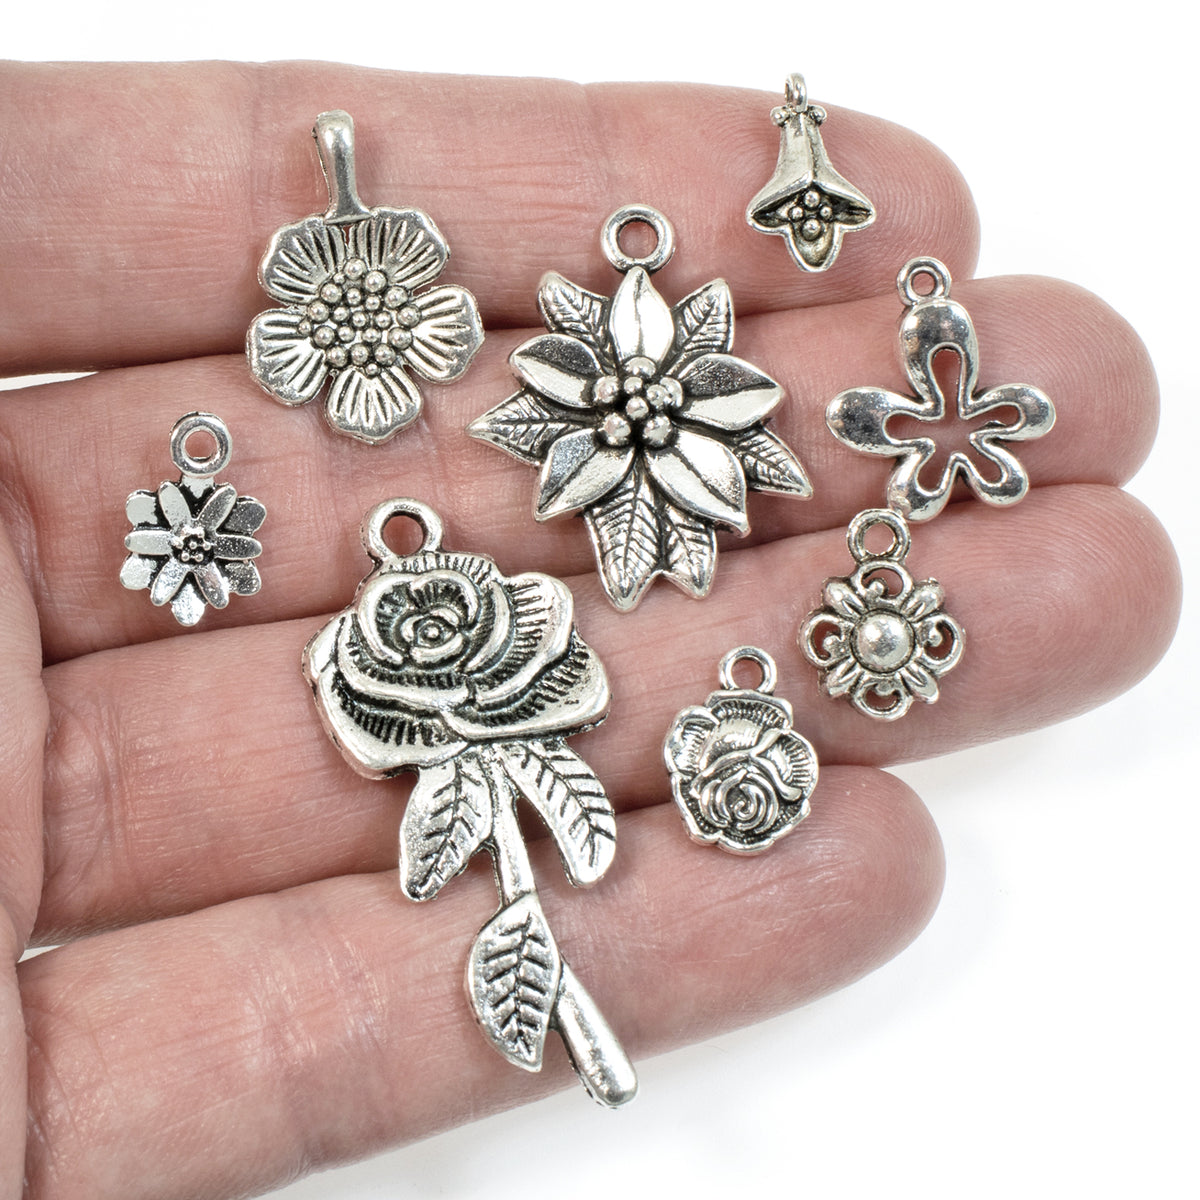 Rose Charms Wholesale Small Antique Silver Pewter » Flower Charm